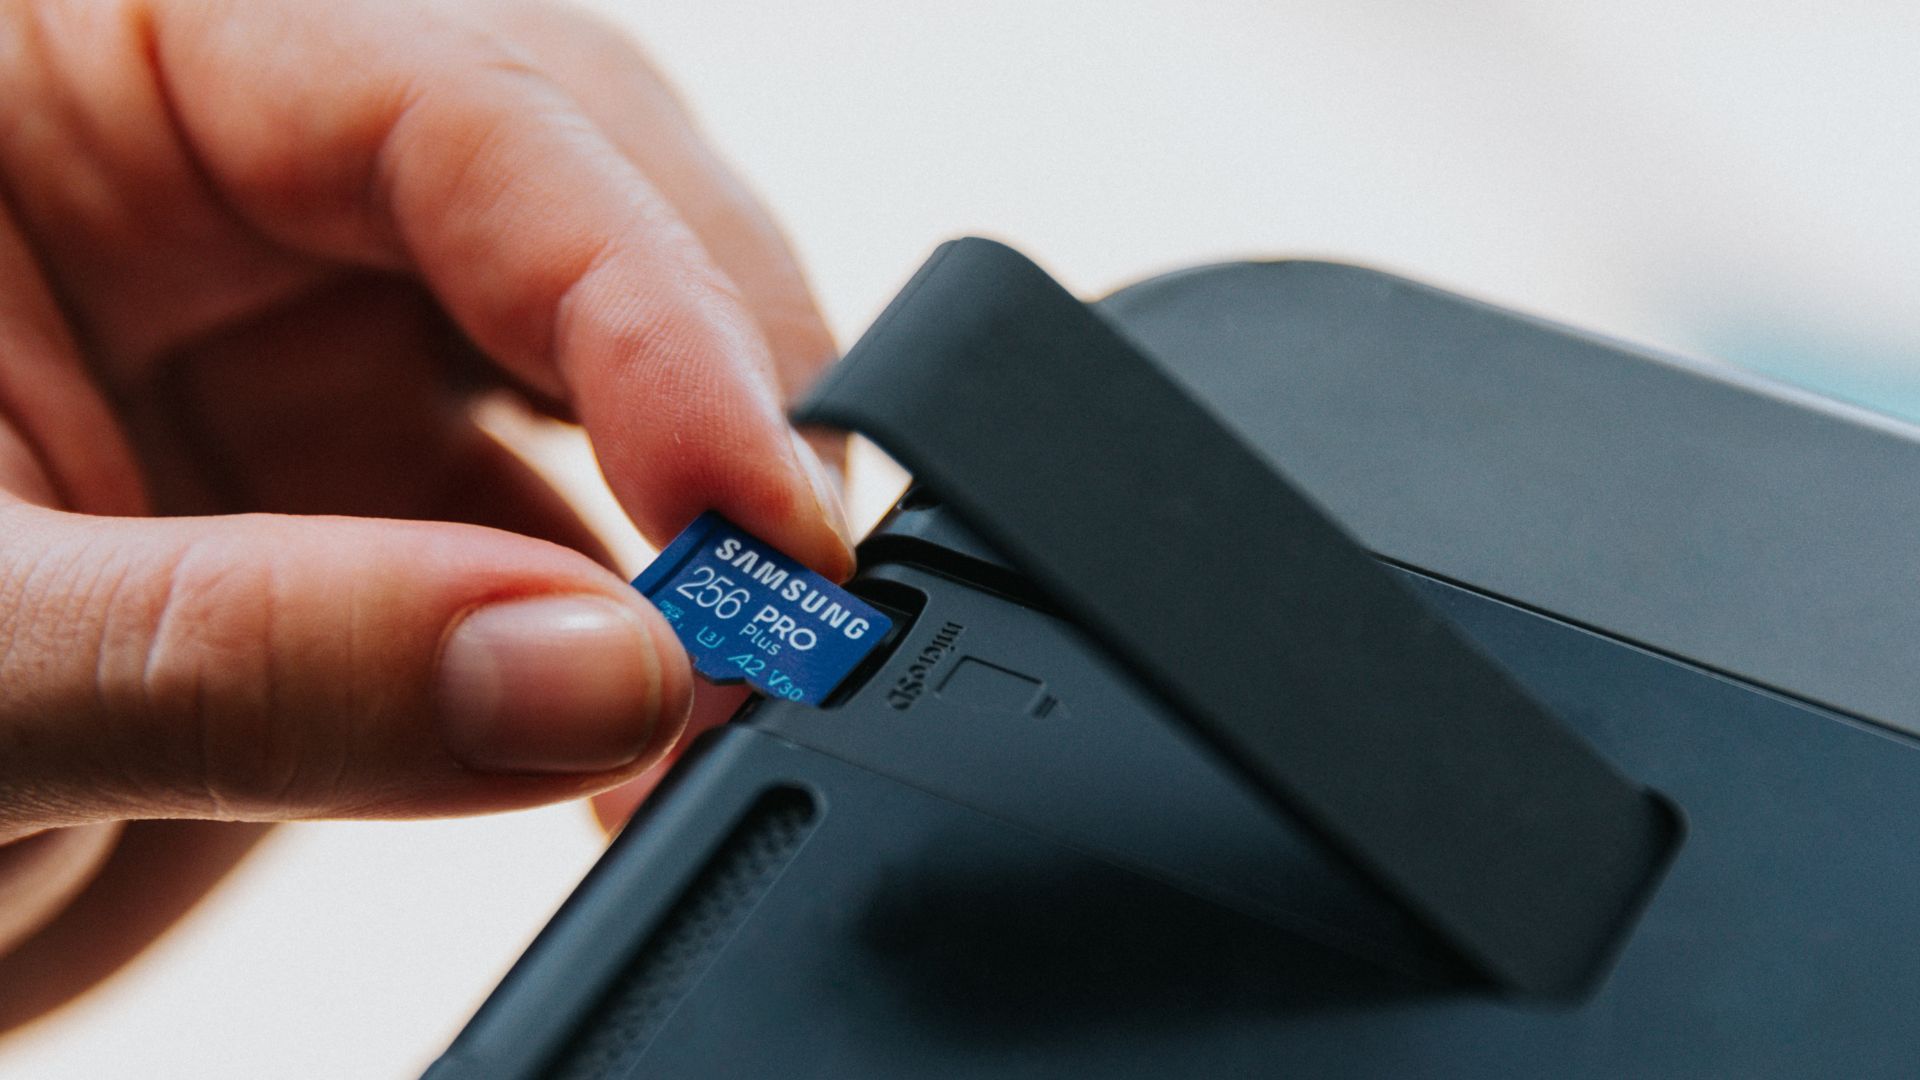 How to safely swap microSD cards on your Nintendo Switch